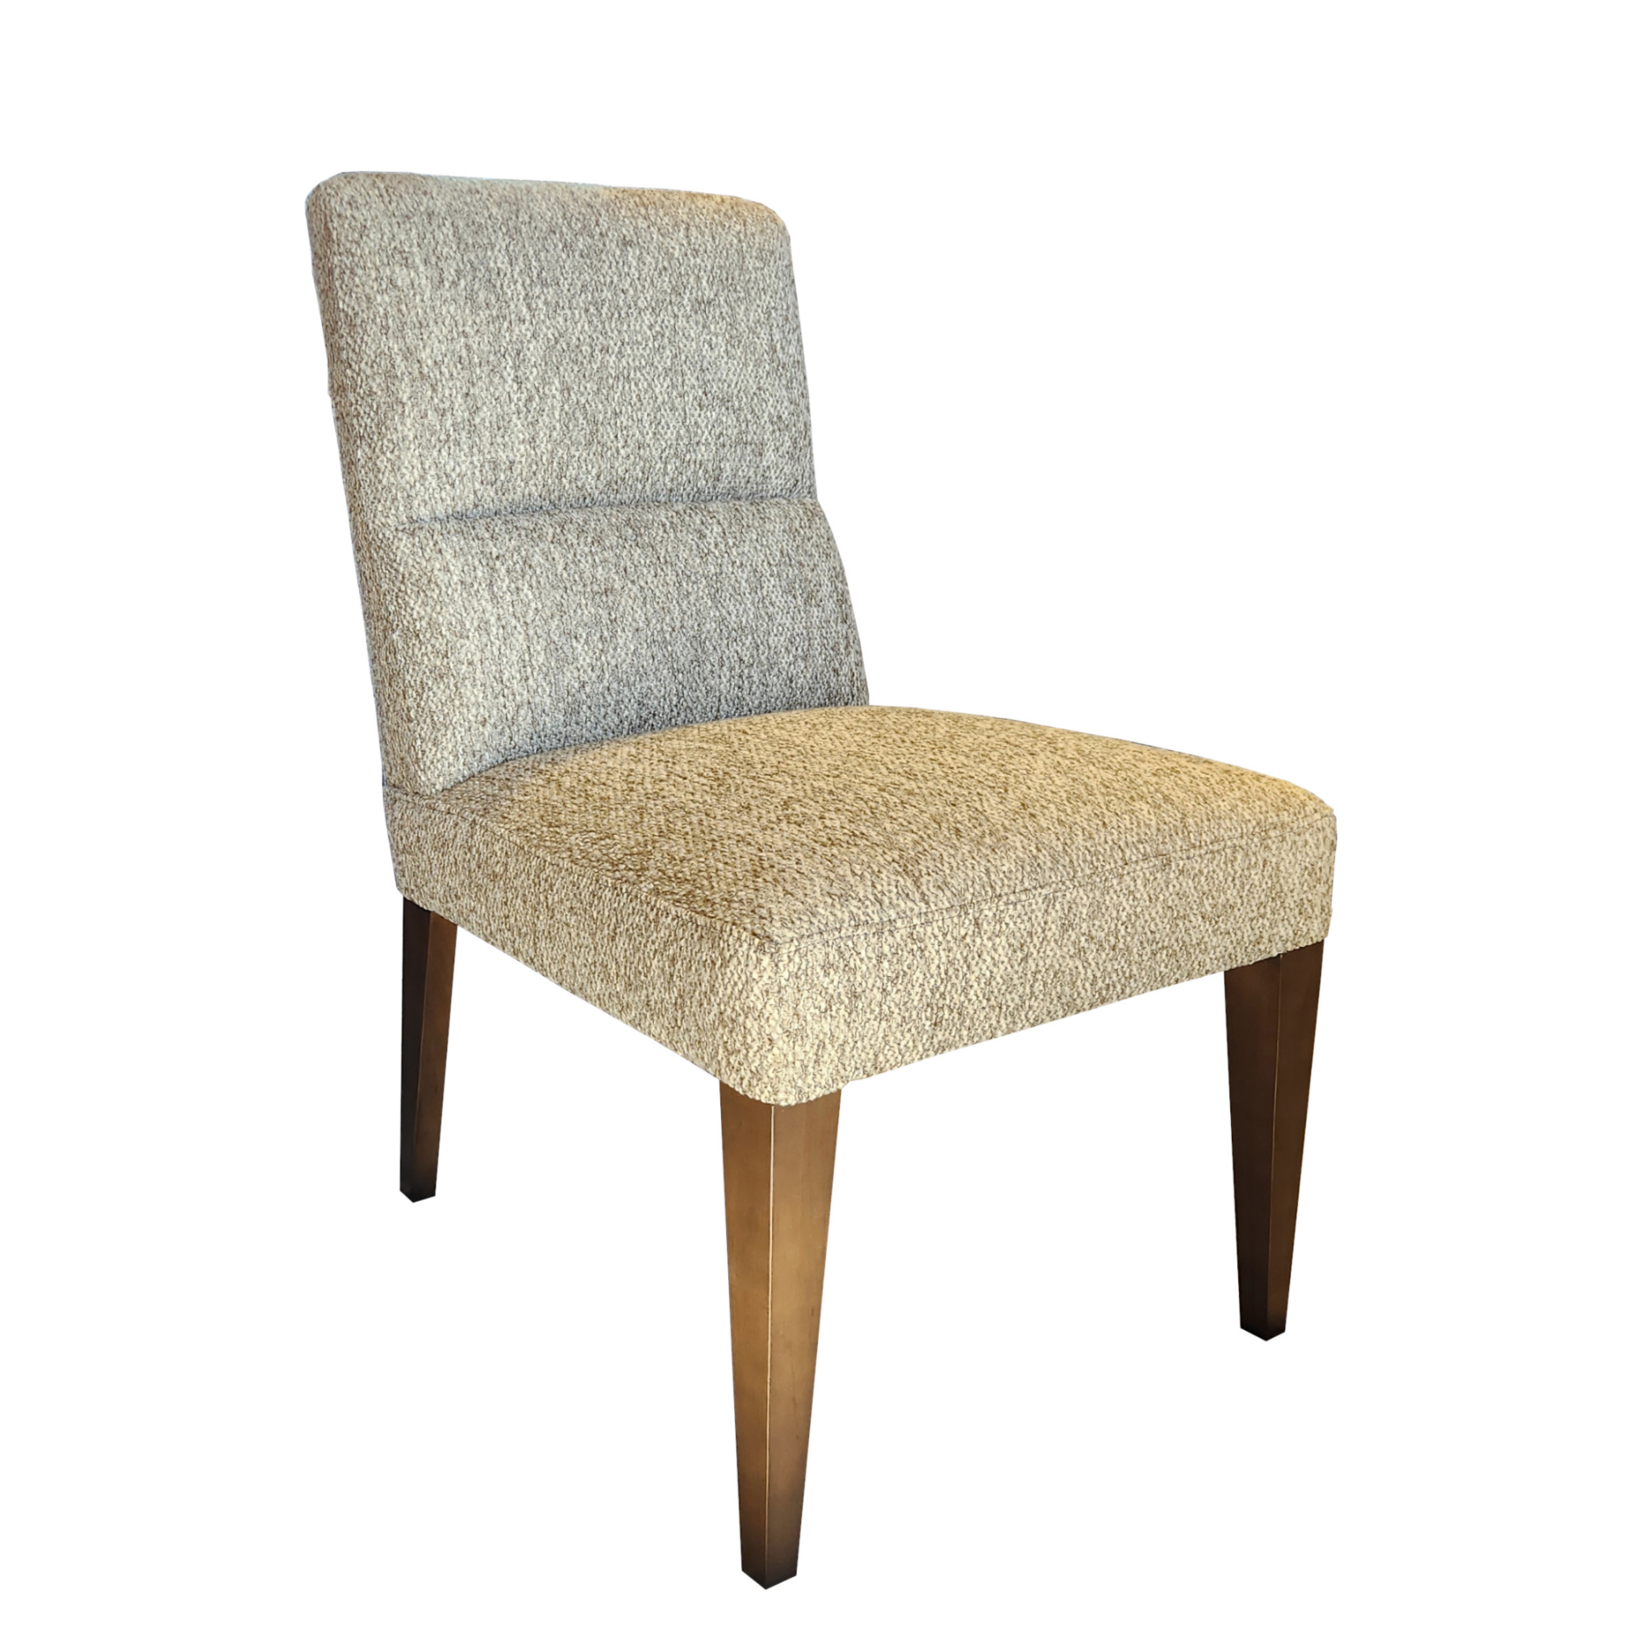 HOOKER FURNITURE FIRTH ARMLESS DINING CHAIR